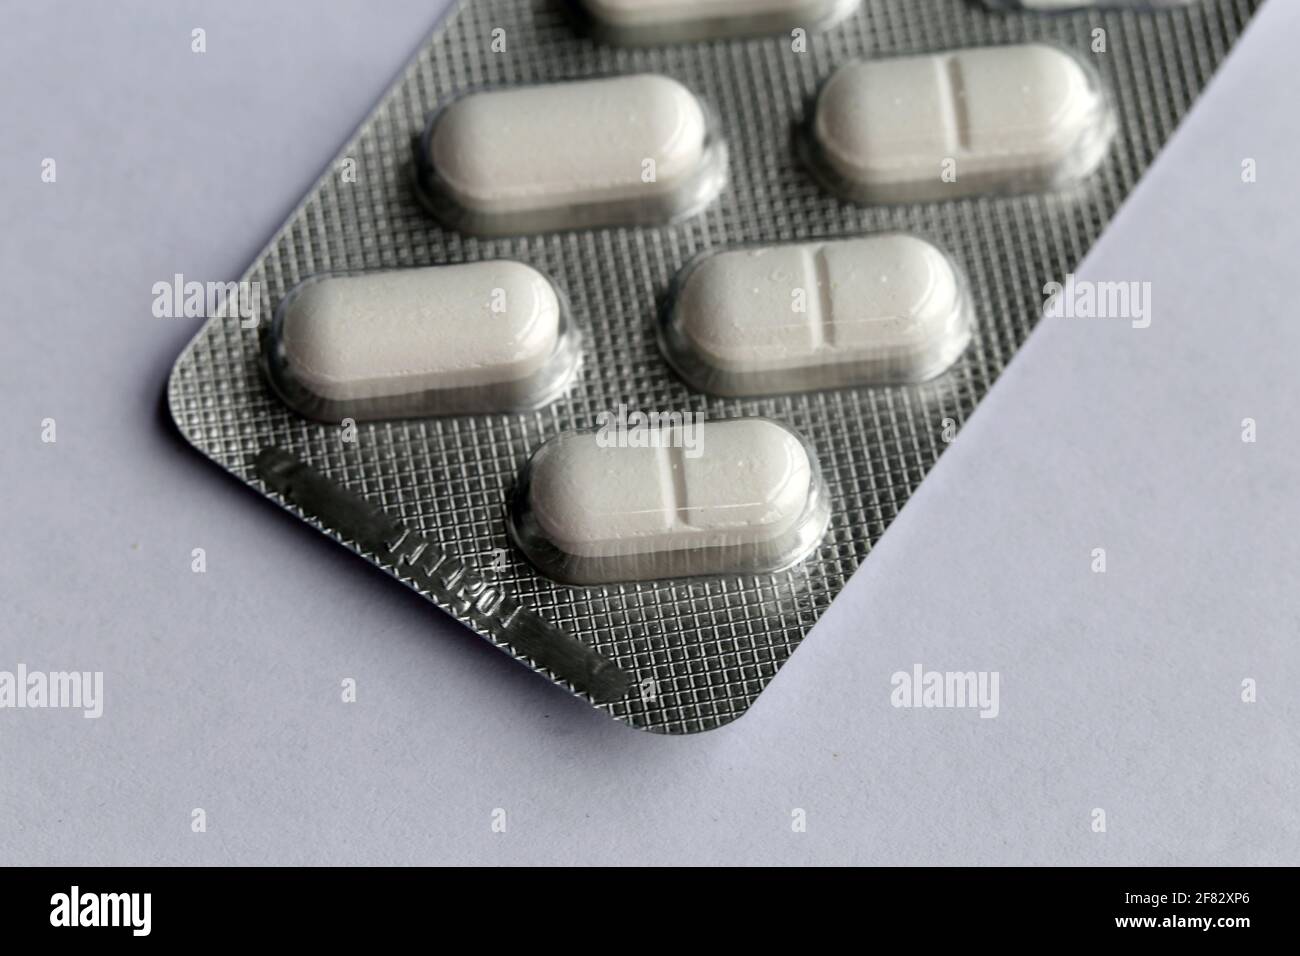 Ibuprofen (Ibumax 400mg) tablets, this is a non steroidal anti-inflammatory drug (NSAID) that relieves pain and treat inflammation. Stock Photo